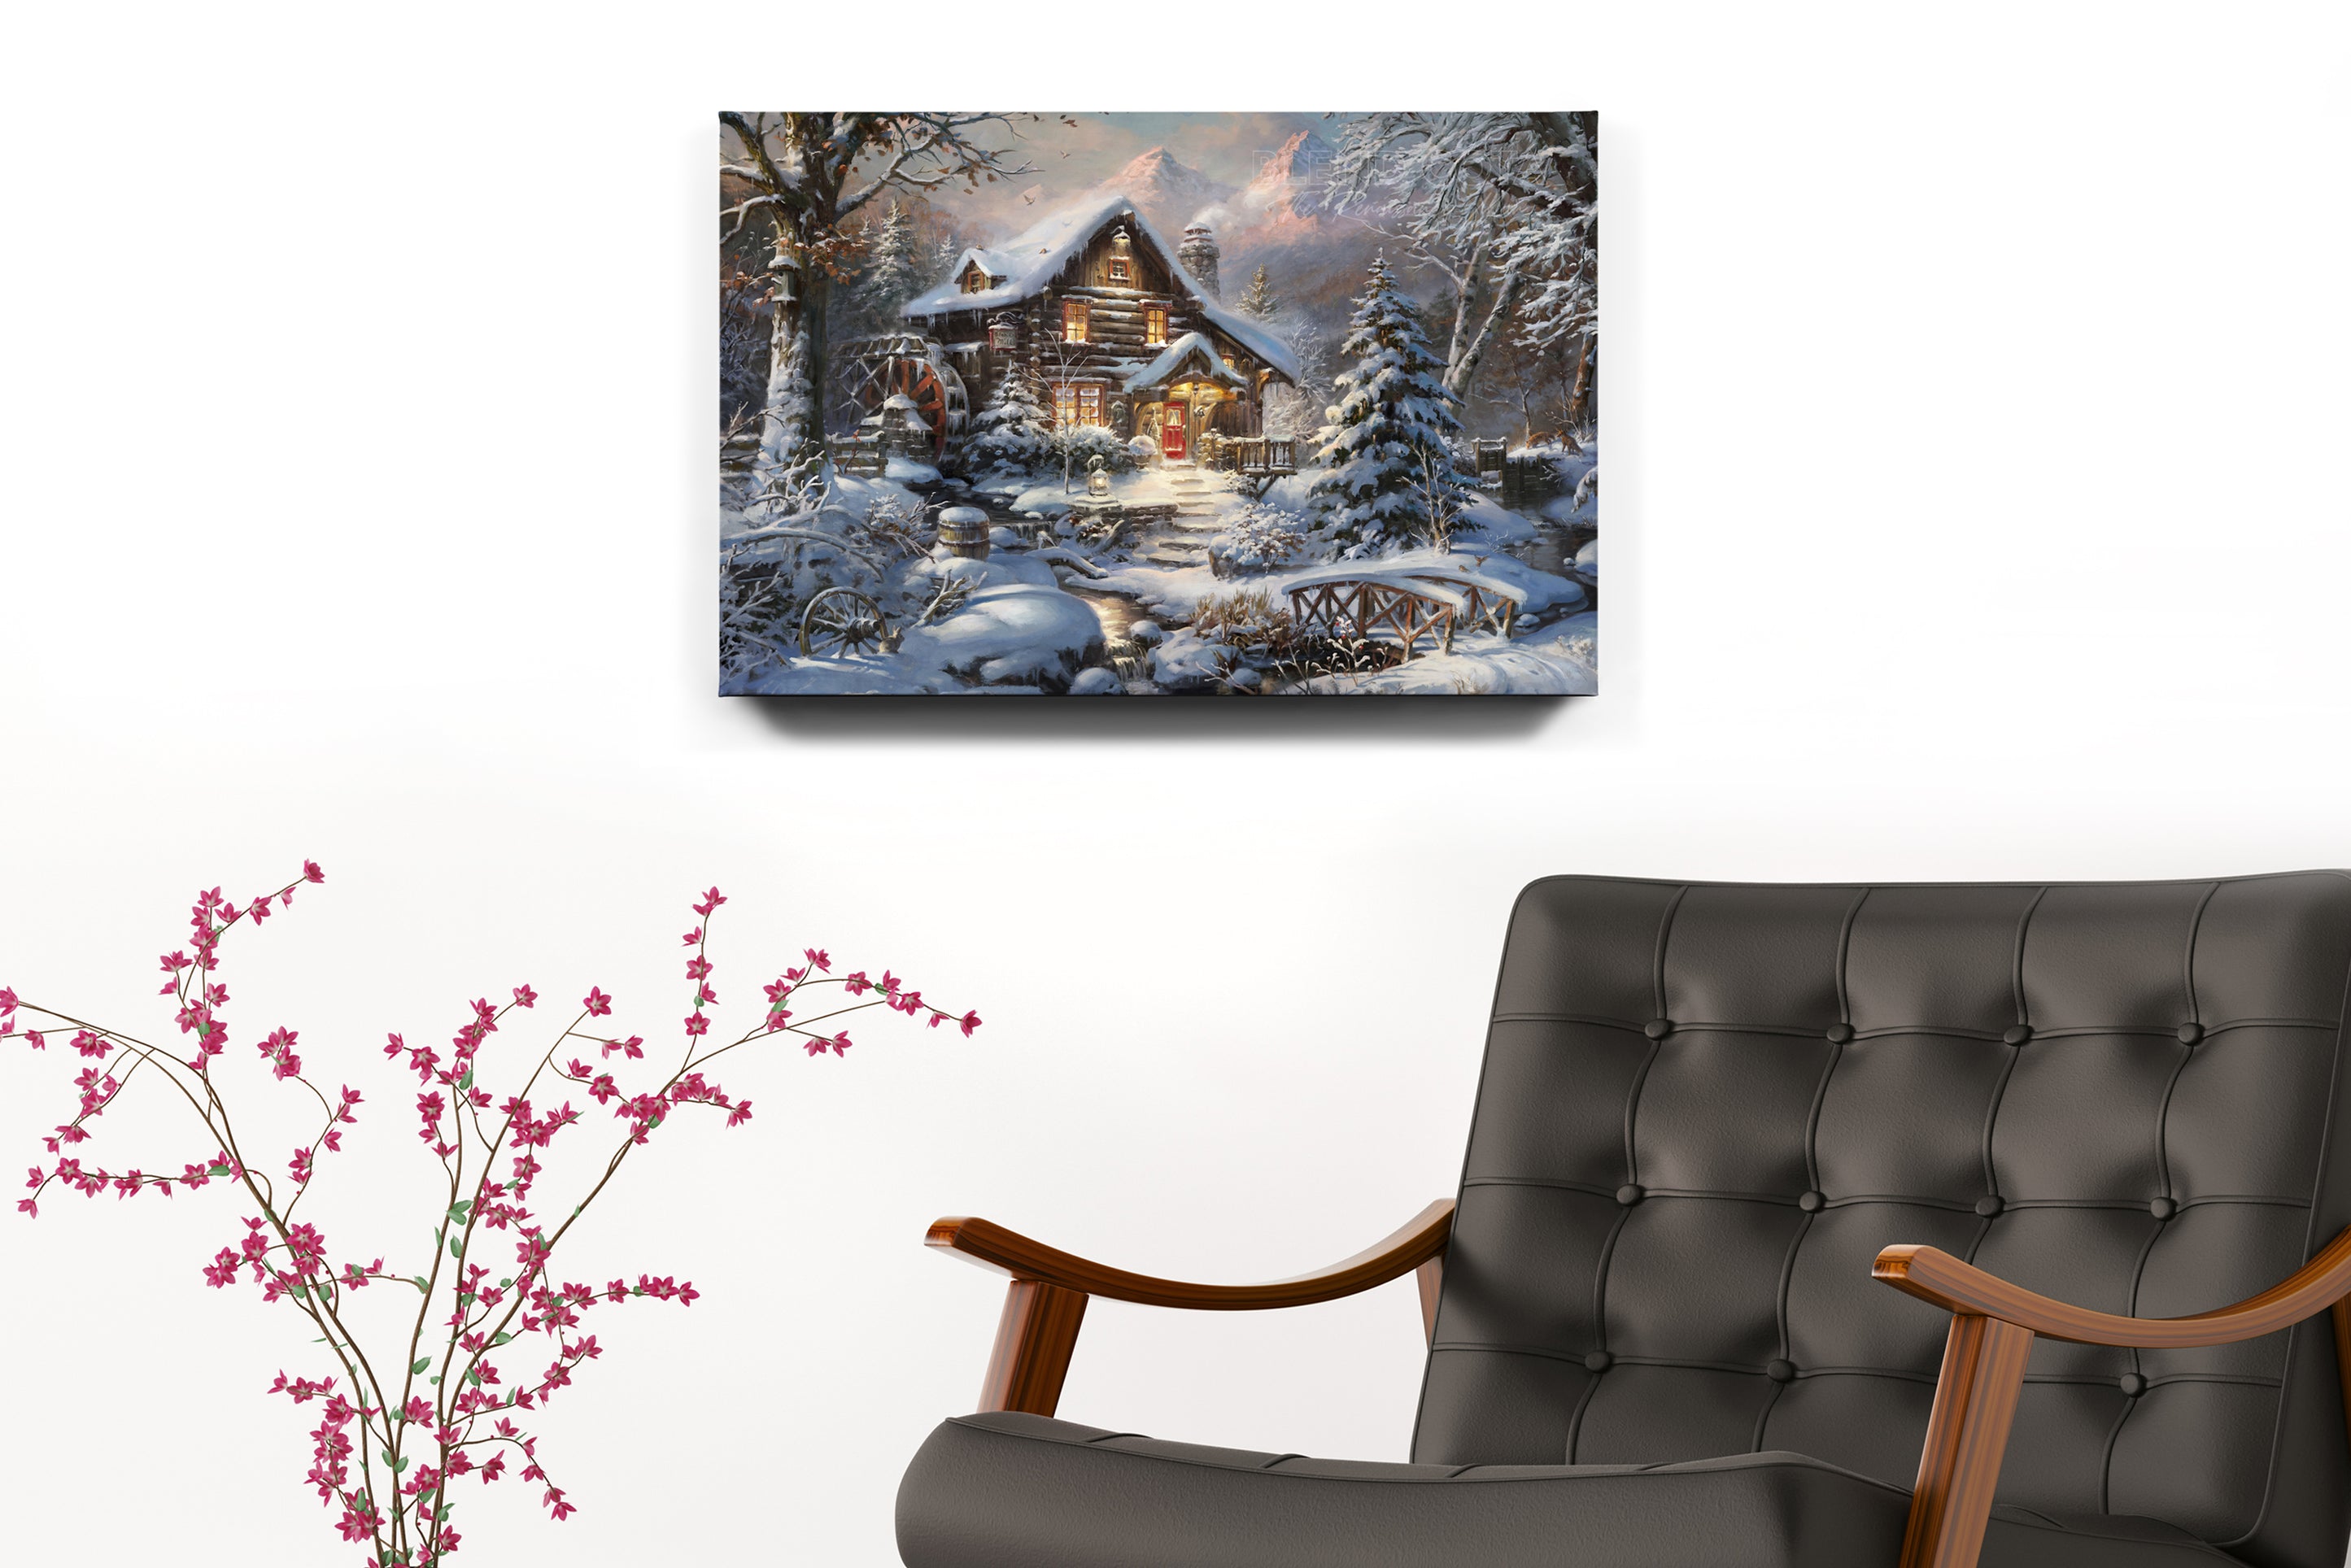 Silence of The First Snow - Blend Cota Art Print on Metal - Blend Cota Studios painting hanging on a white wall behind a black leather armchair